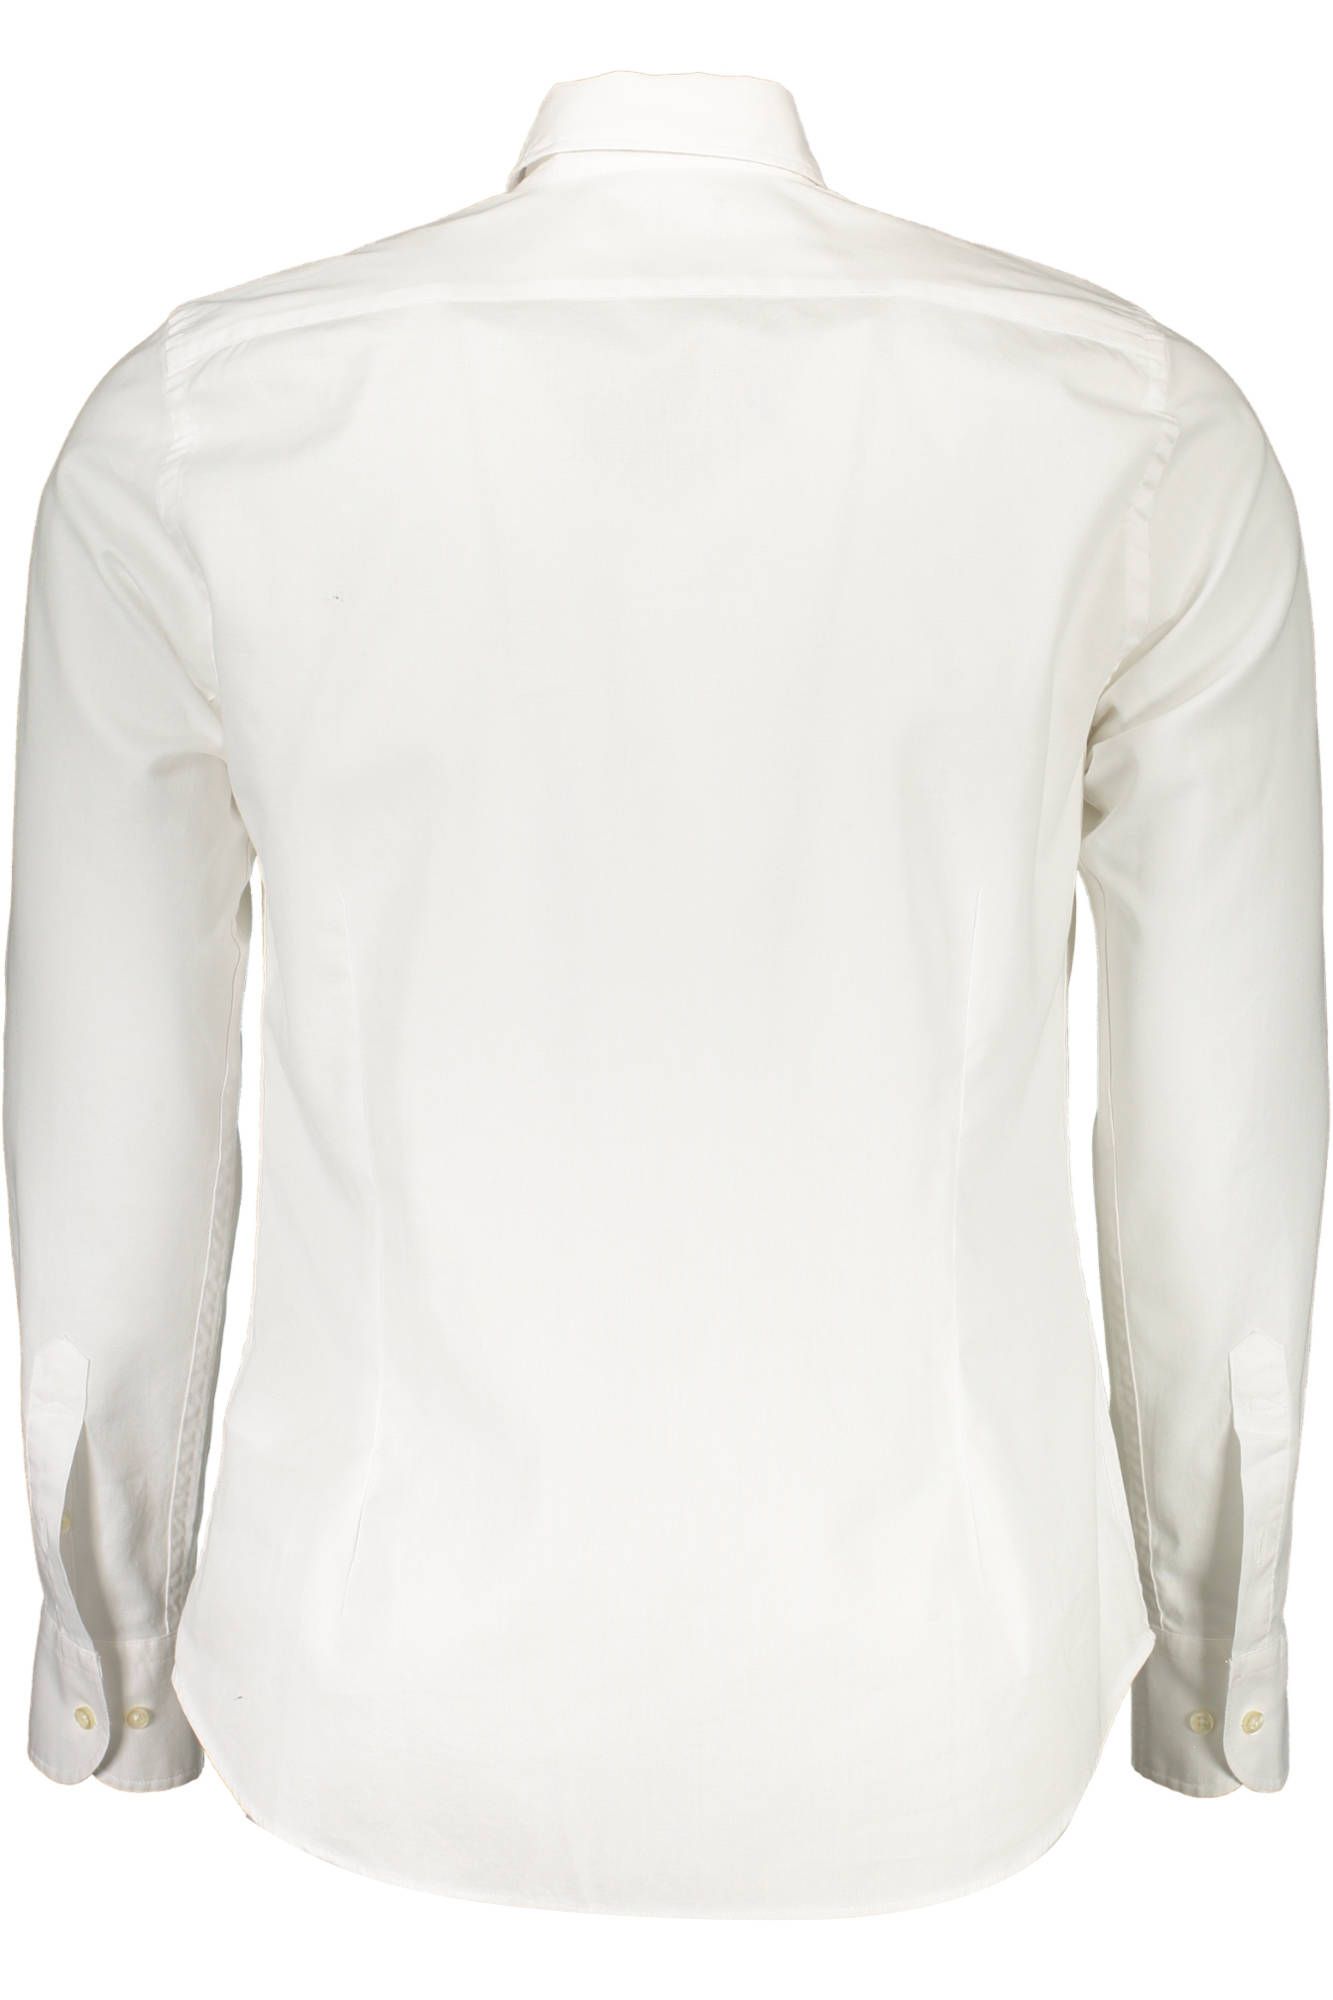 Slim Fit Embroidered White Shirt